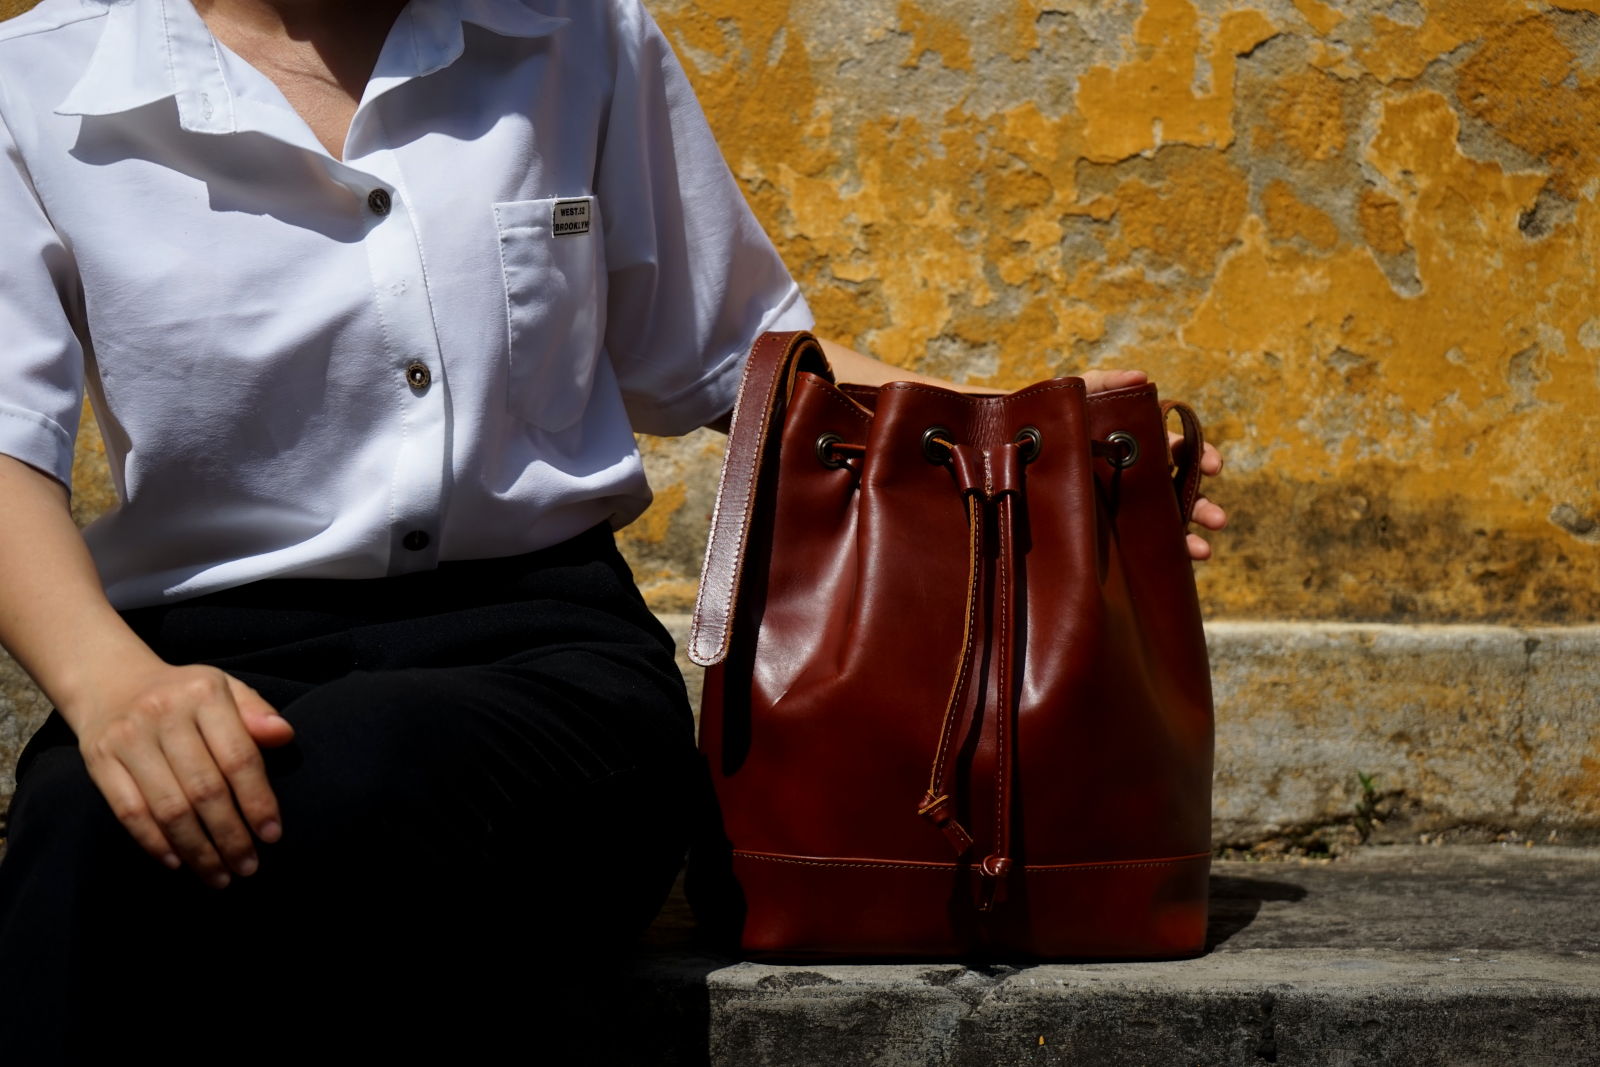 Hoi An Real Leather - Da Bao Real Leather: Brown bucket bag in front of yellow wall in Hoi An Old Town